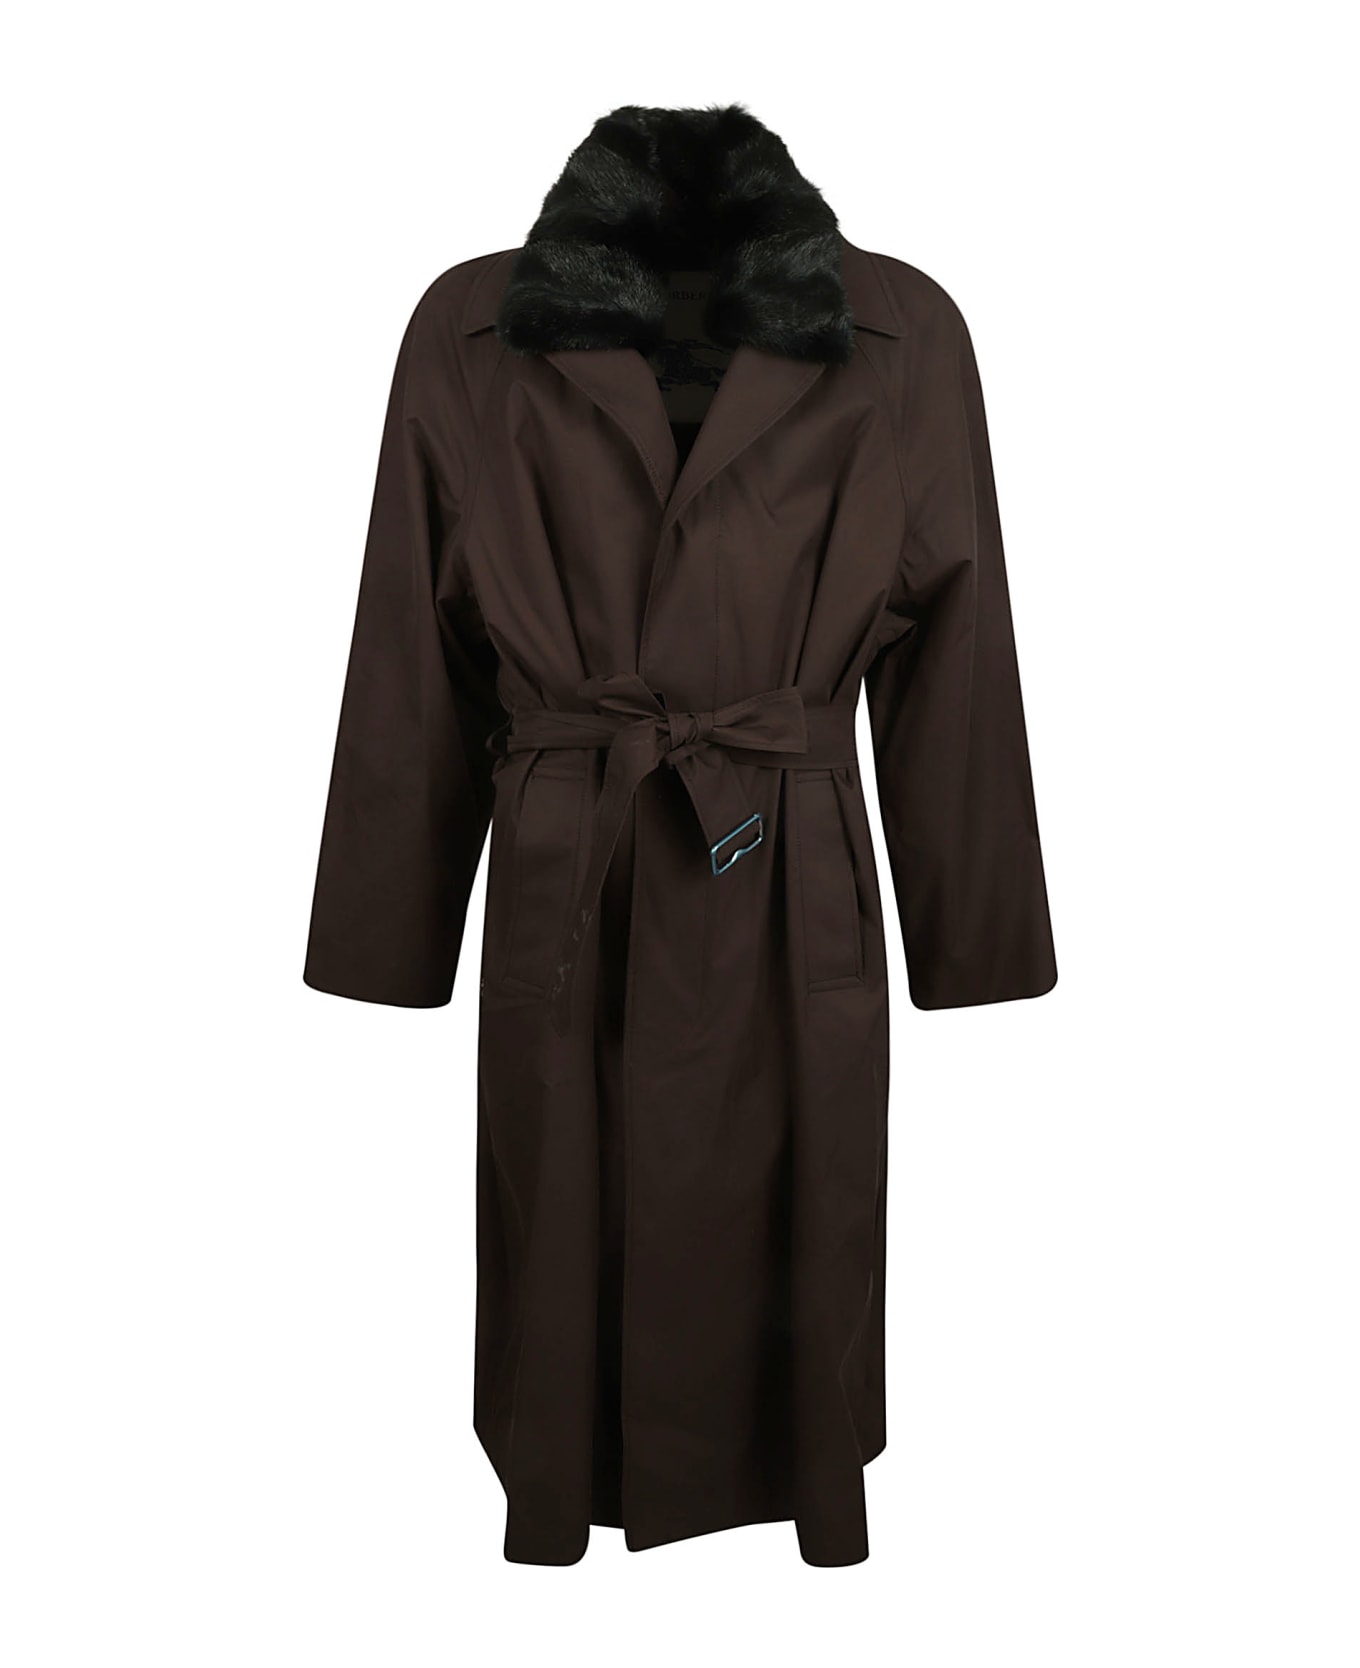 Burberry Belted Long Coat - Otter